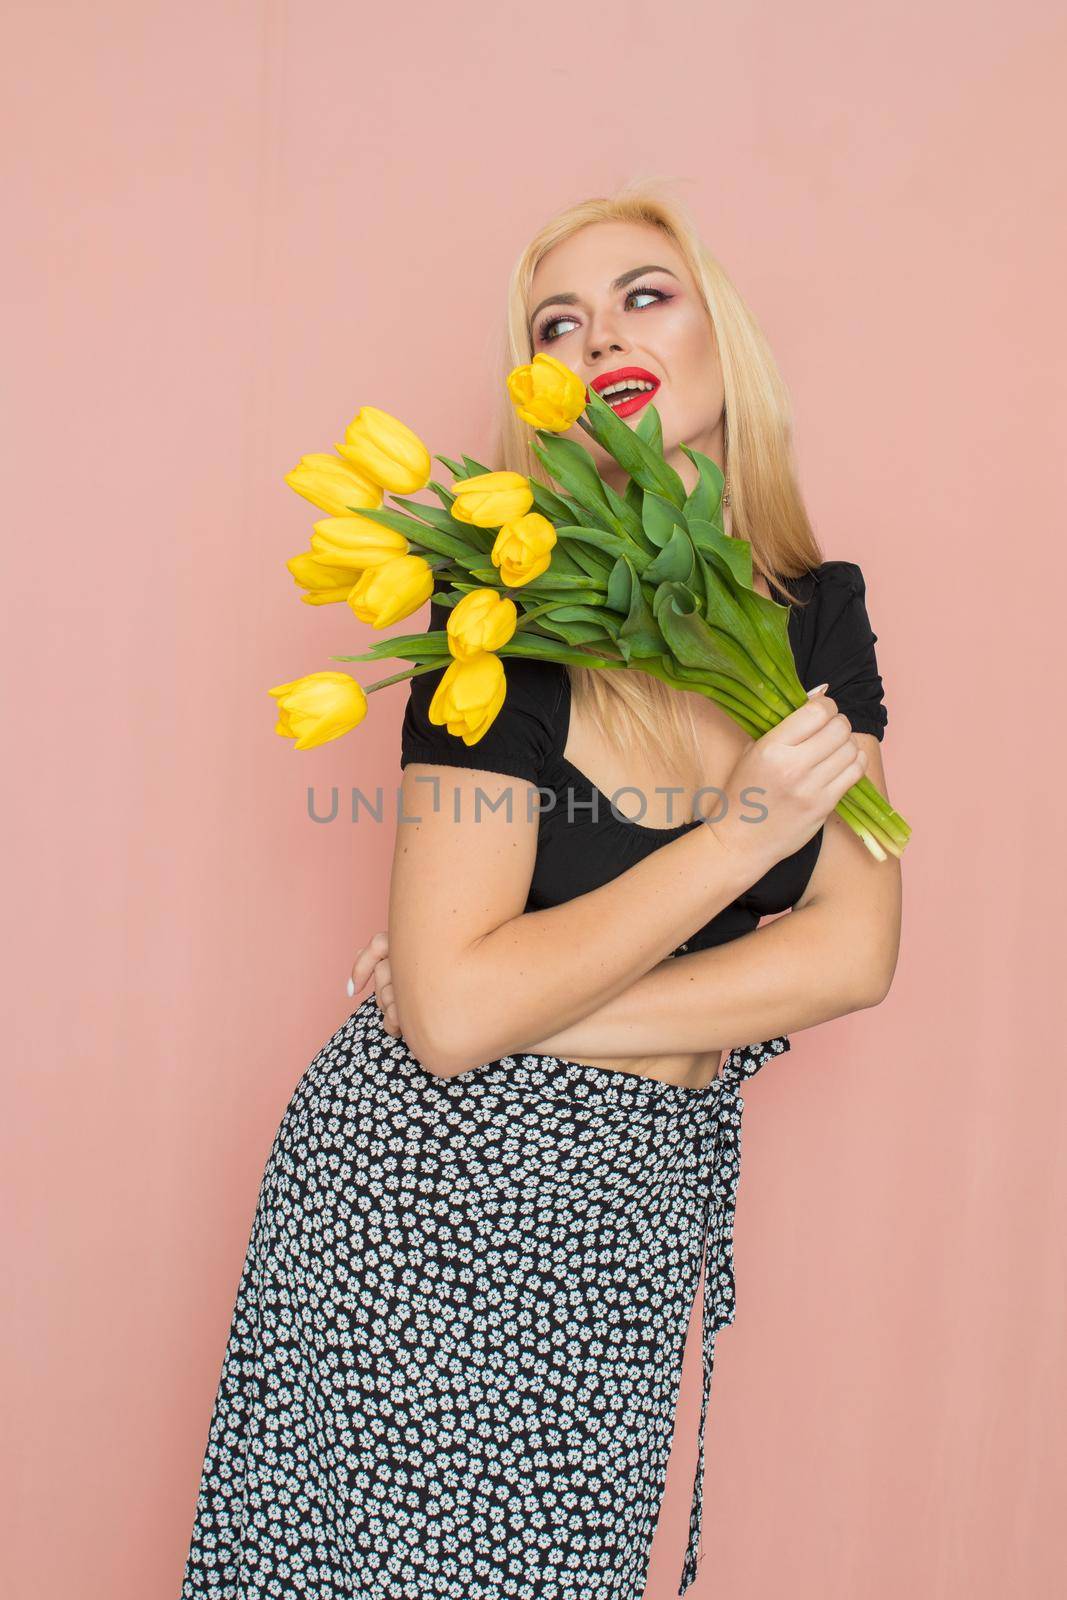 Woman in black top and skirt holding yellow tulips by Bonda